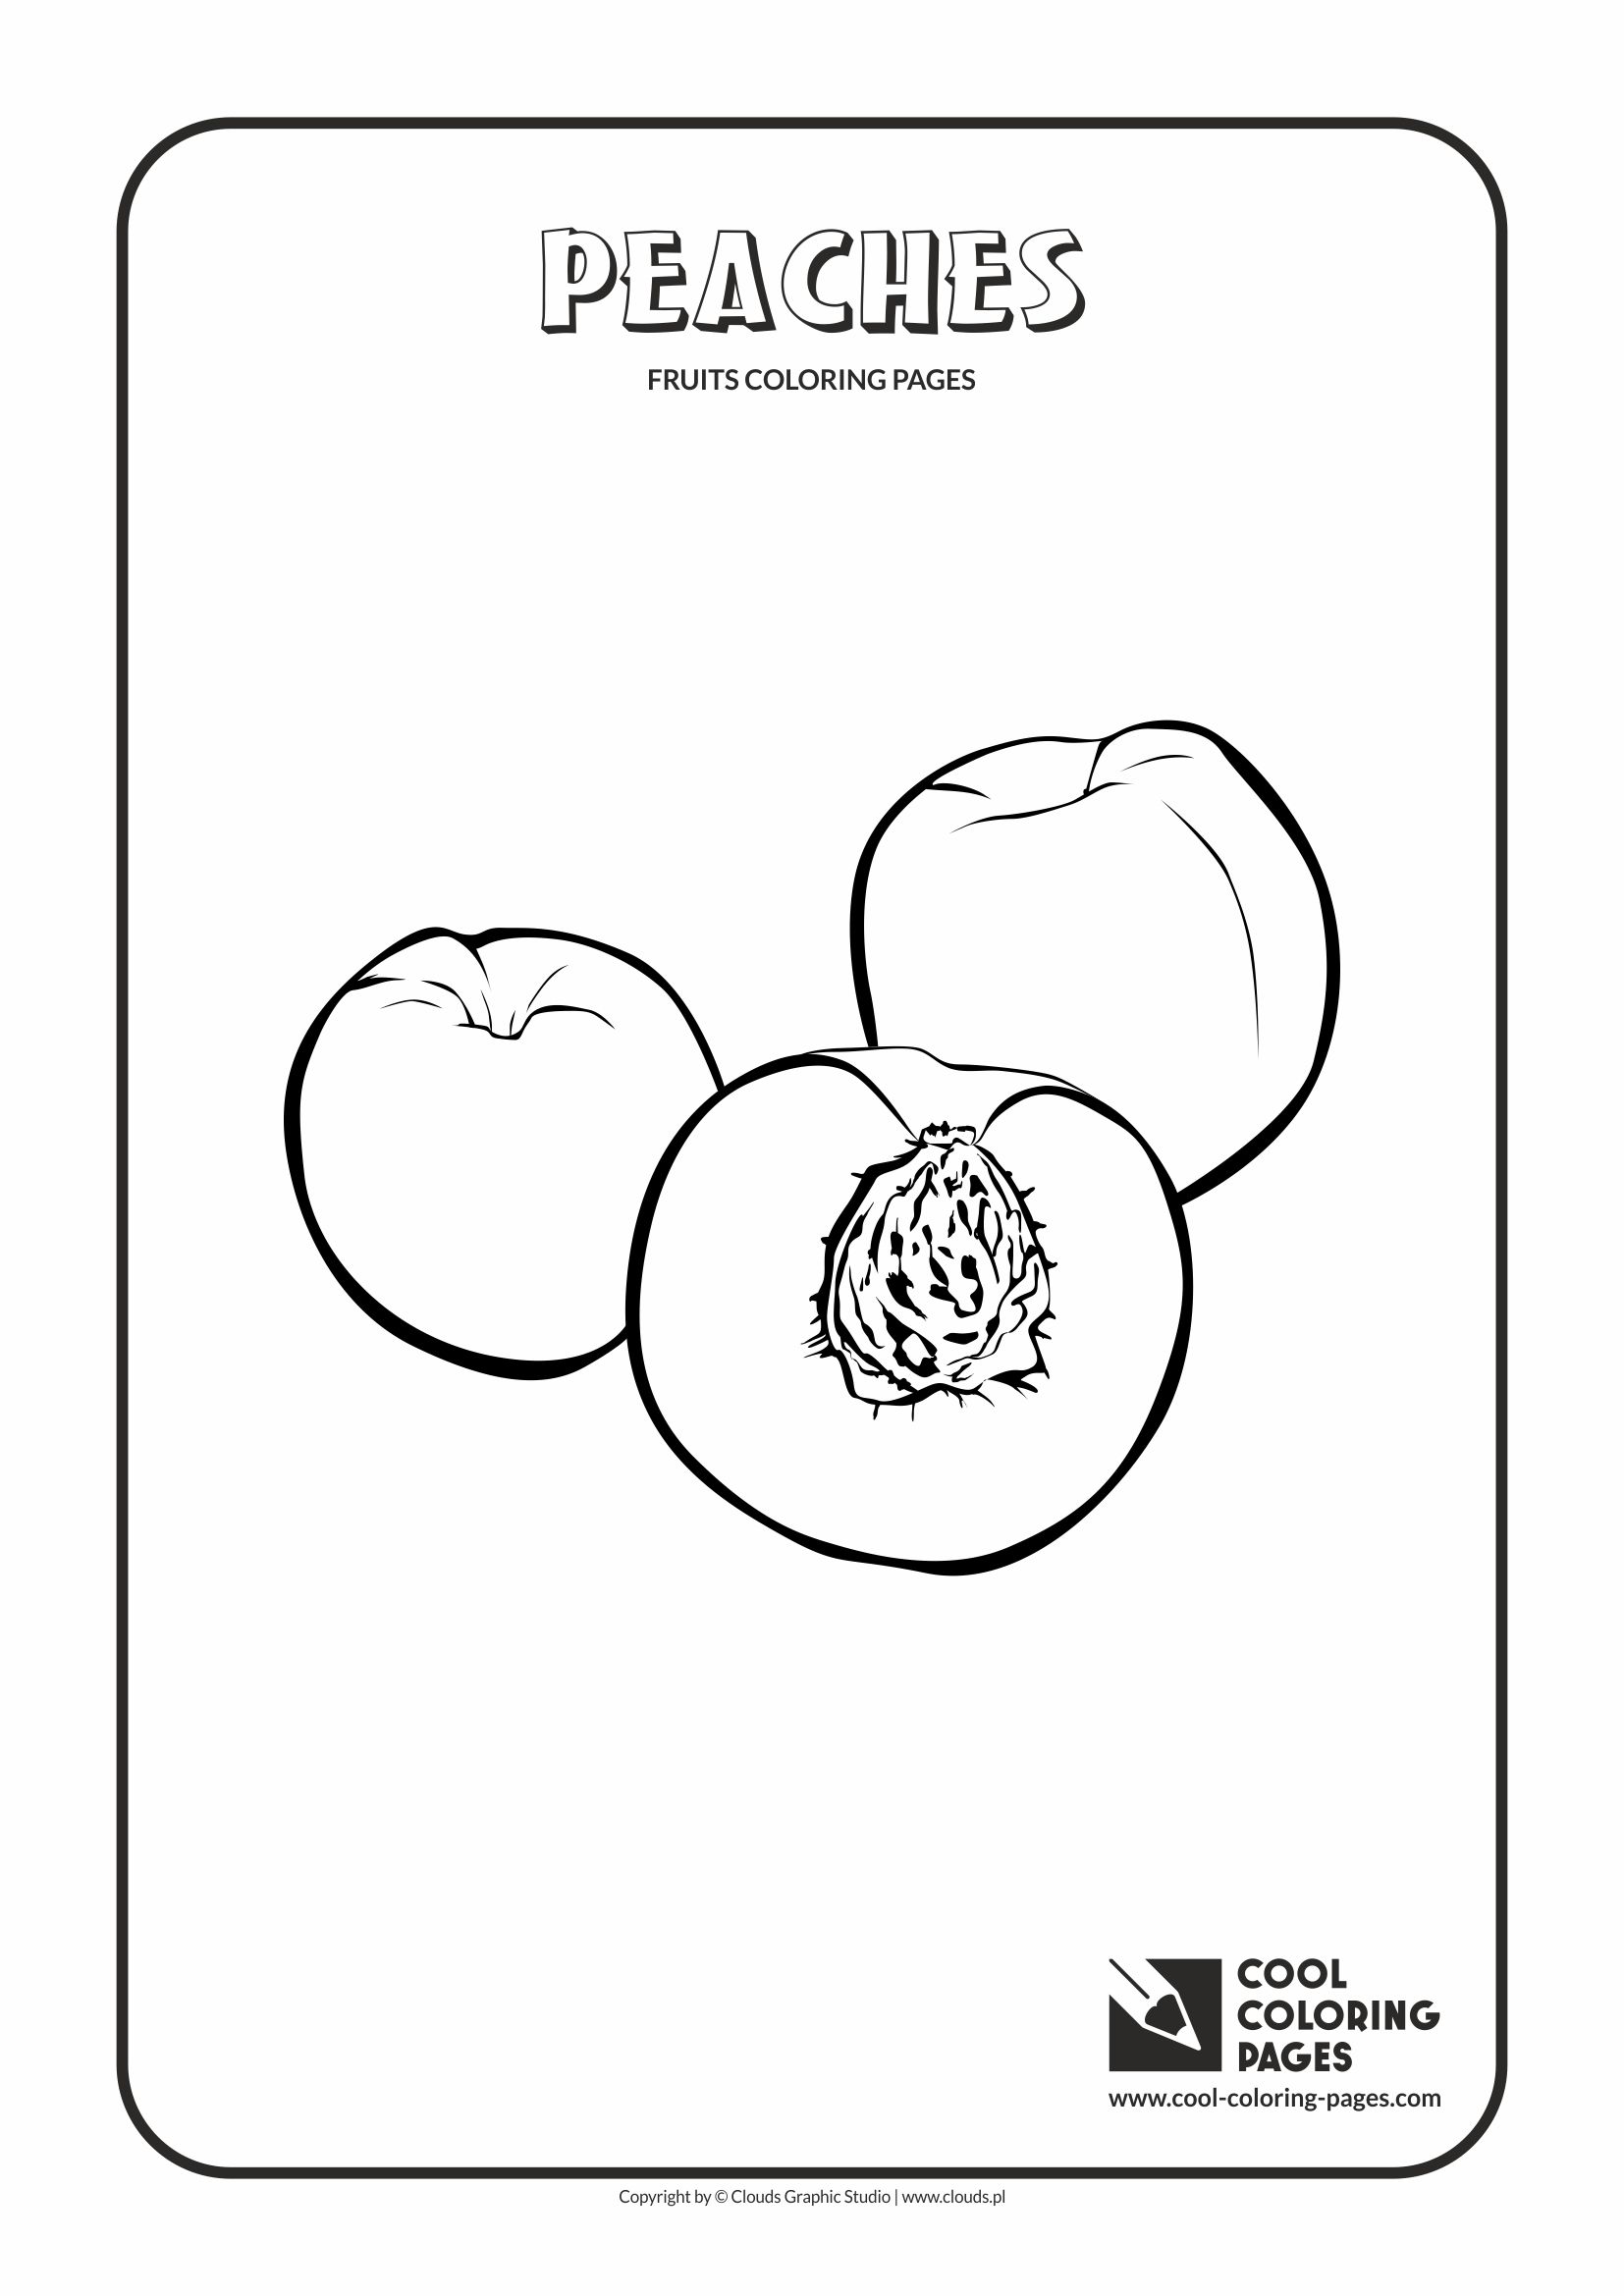 Cool Coloring Pages - Plants / Peaches / Coloring page with peaches